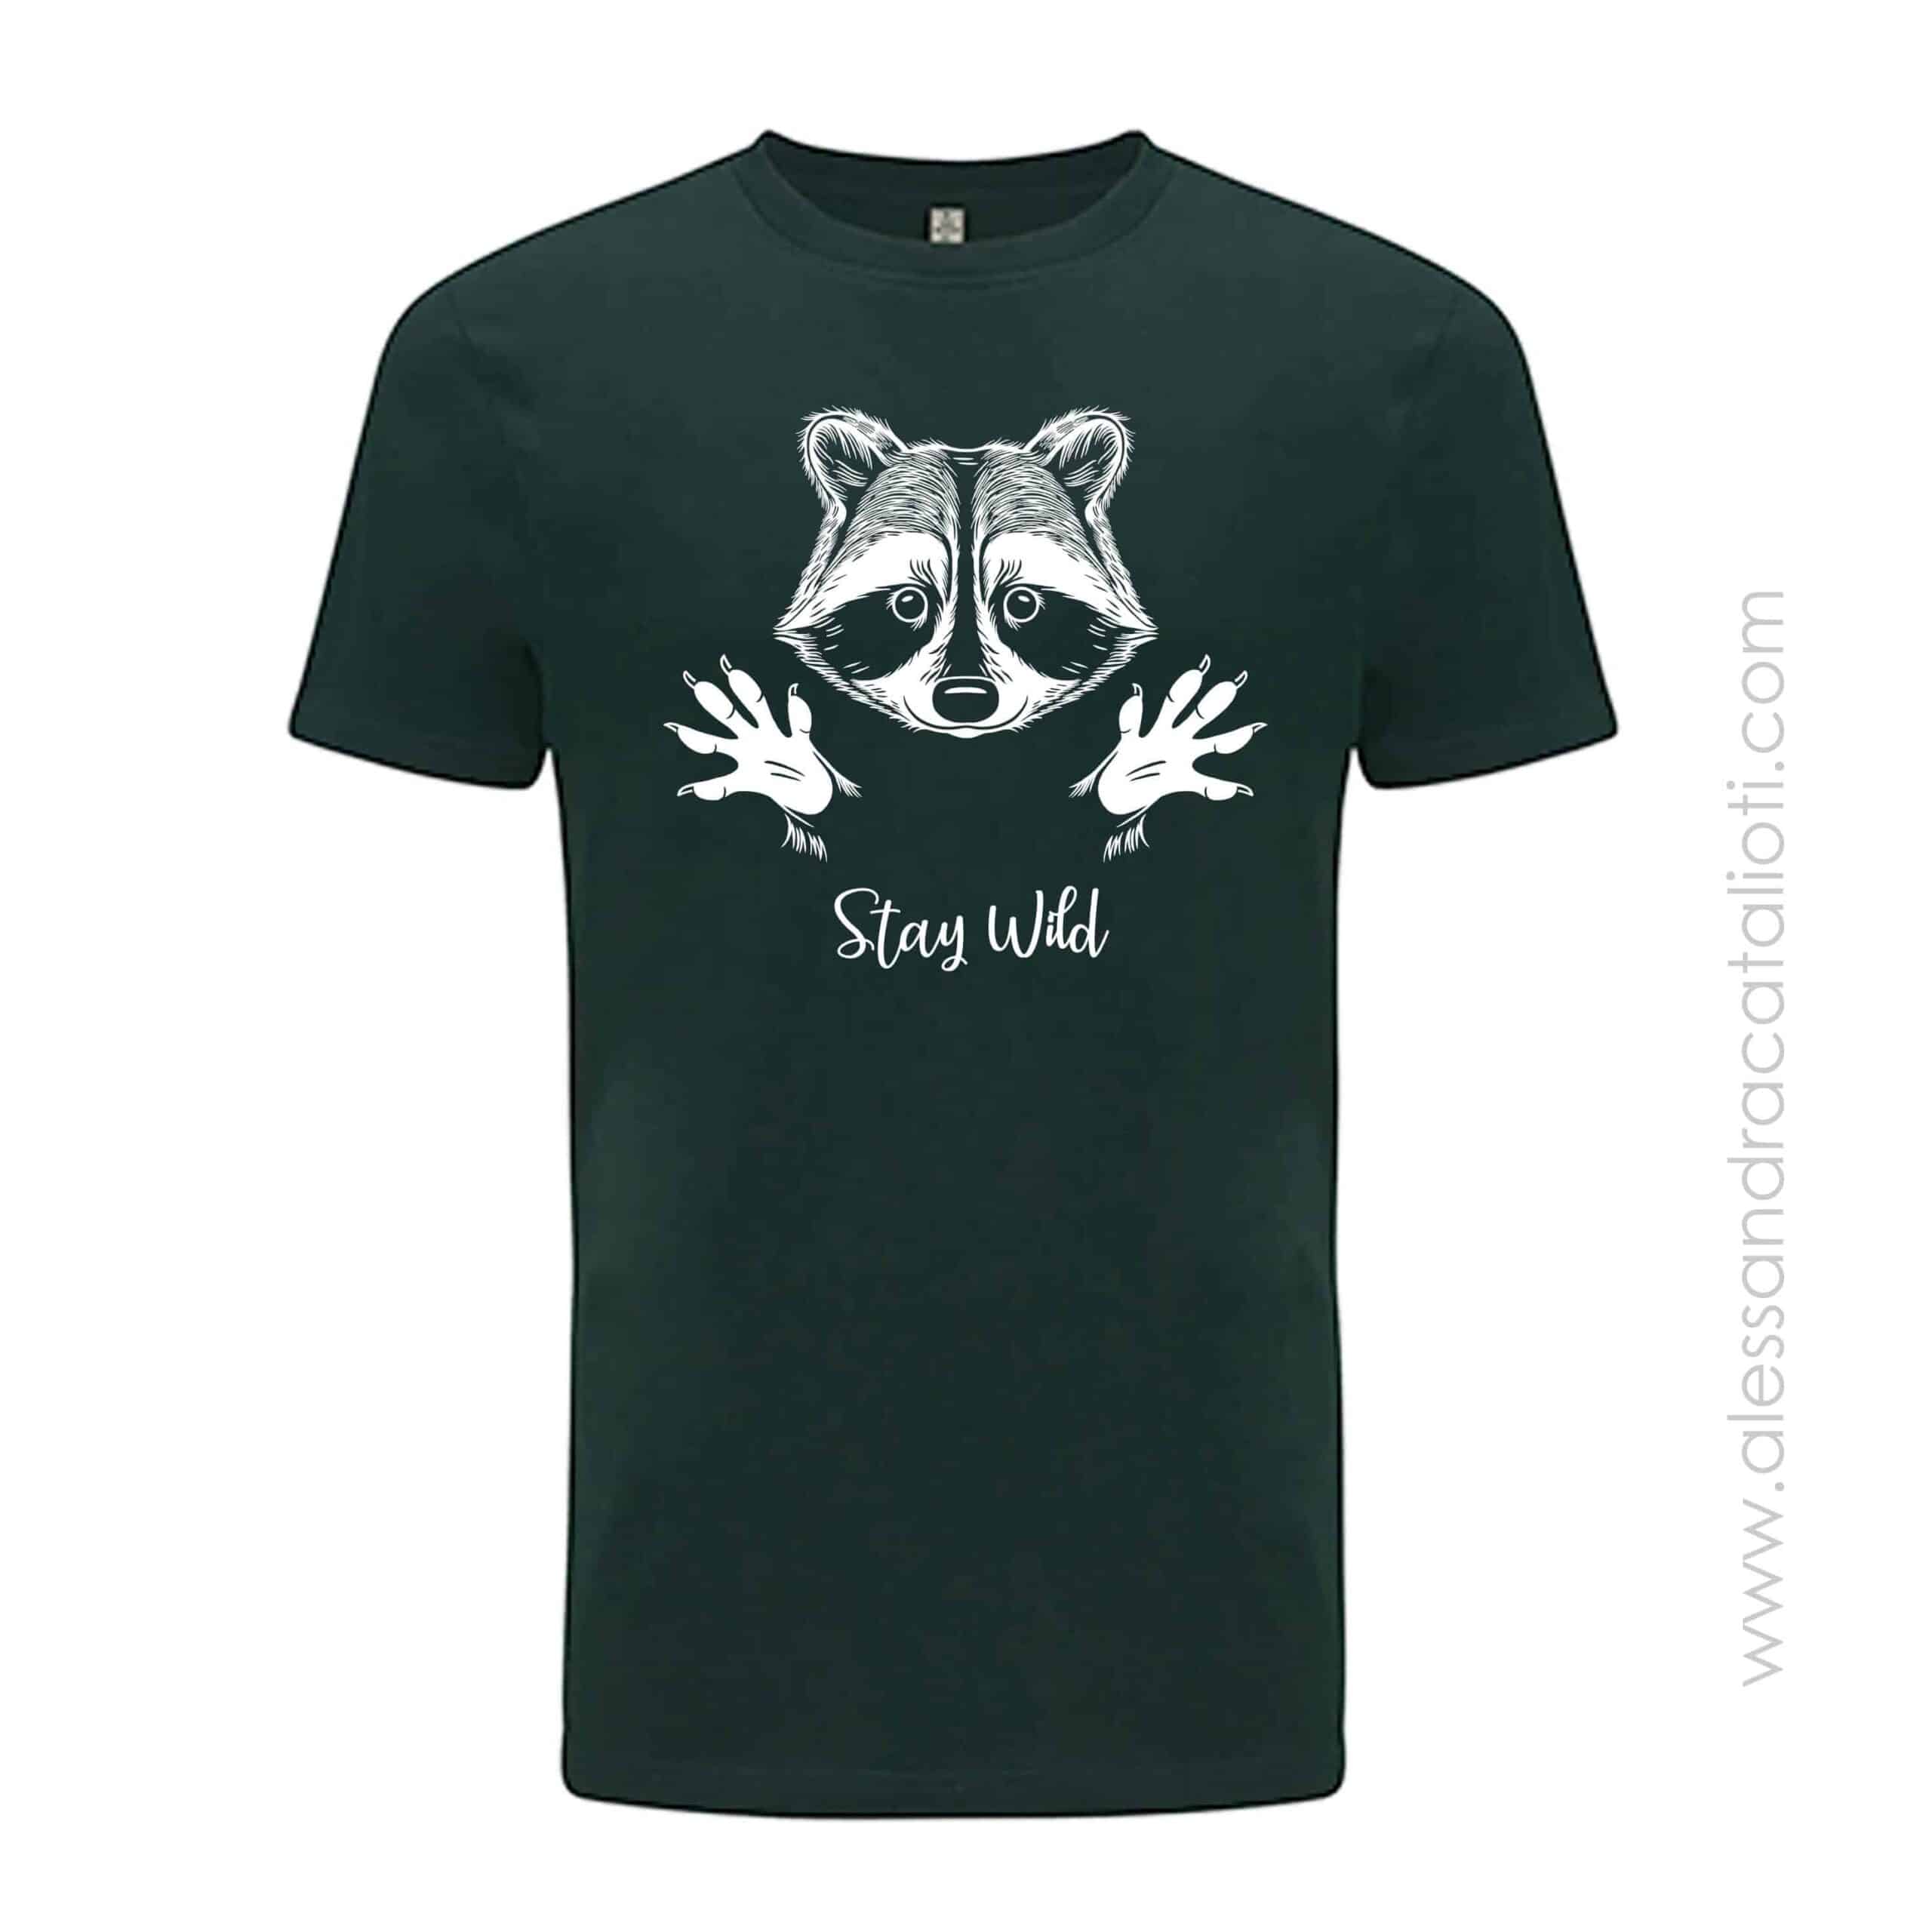 Vegan unisex raccoon from 100% recycled material